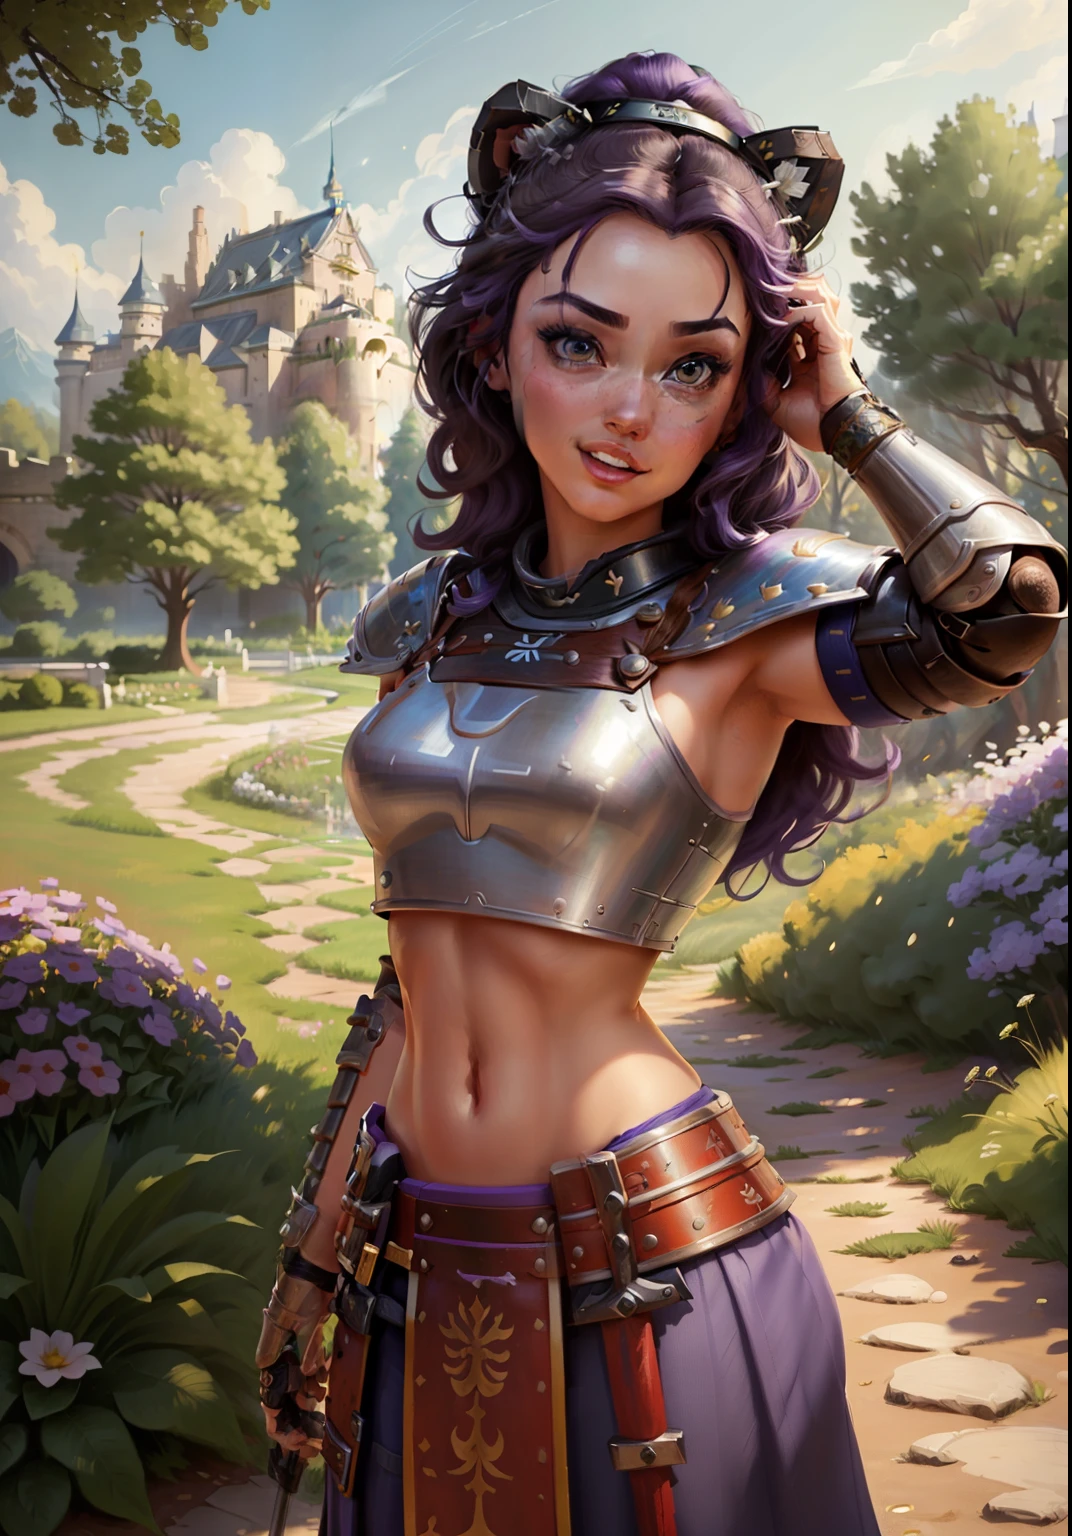 (BelleWaifu:1), (knight's armor:0.3), the garden in the background, surprised, cute, cute pose, (flirting), looking at the viewer, (square hairstyle), (purple hair), (metal knight crop top on naked body in the style of samurai:1.3), :D, (realistic: 1), (cartoon), (masterpiece: 1.2), (best quality), (over-detailed), (8k, 4k, intricate), (full-length shot: 1), (cowboy shot: 1.2), (85mm), light particles, lighting, (very detailed: 1.2), (detailed face: 1), (gradients), sfw, colorful, (detailed eyes: 1.2), (detailed landscape, trees, garden, castle:1.2),(detailed background), detailed landscape, (dynamic angle:1.2), (dynamic pose:1.2), (rule third_composition:1.3), (line of action:1.2), wide view, daylight, solo
